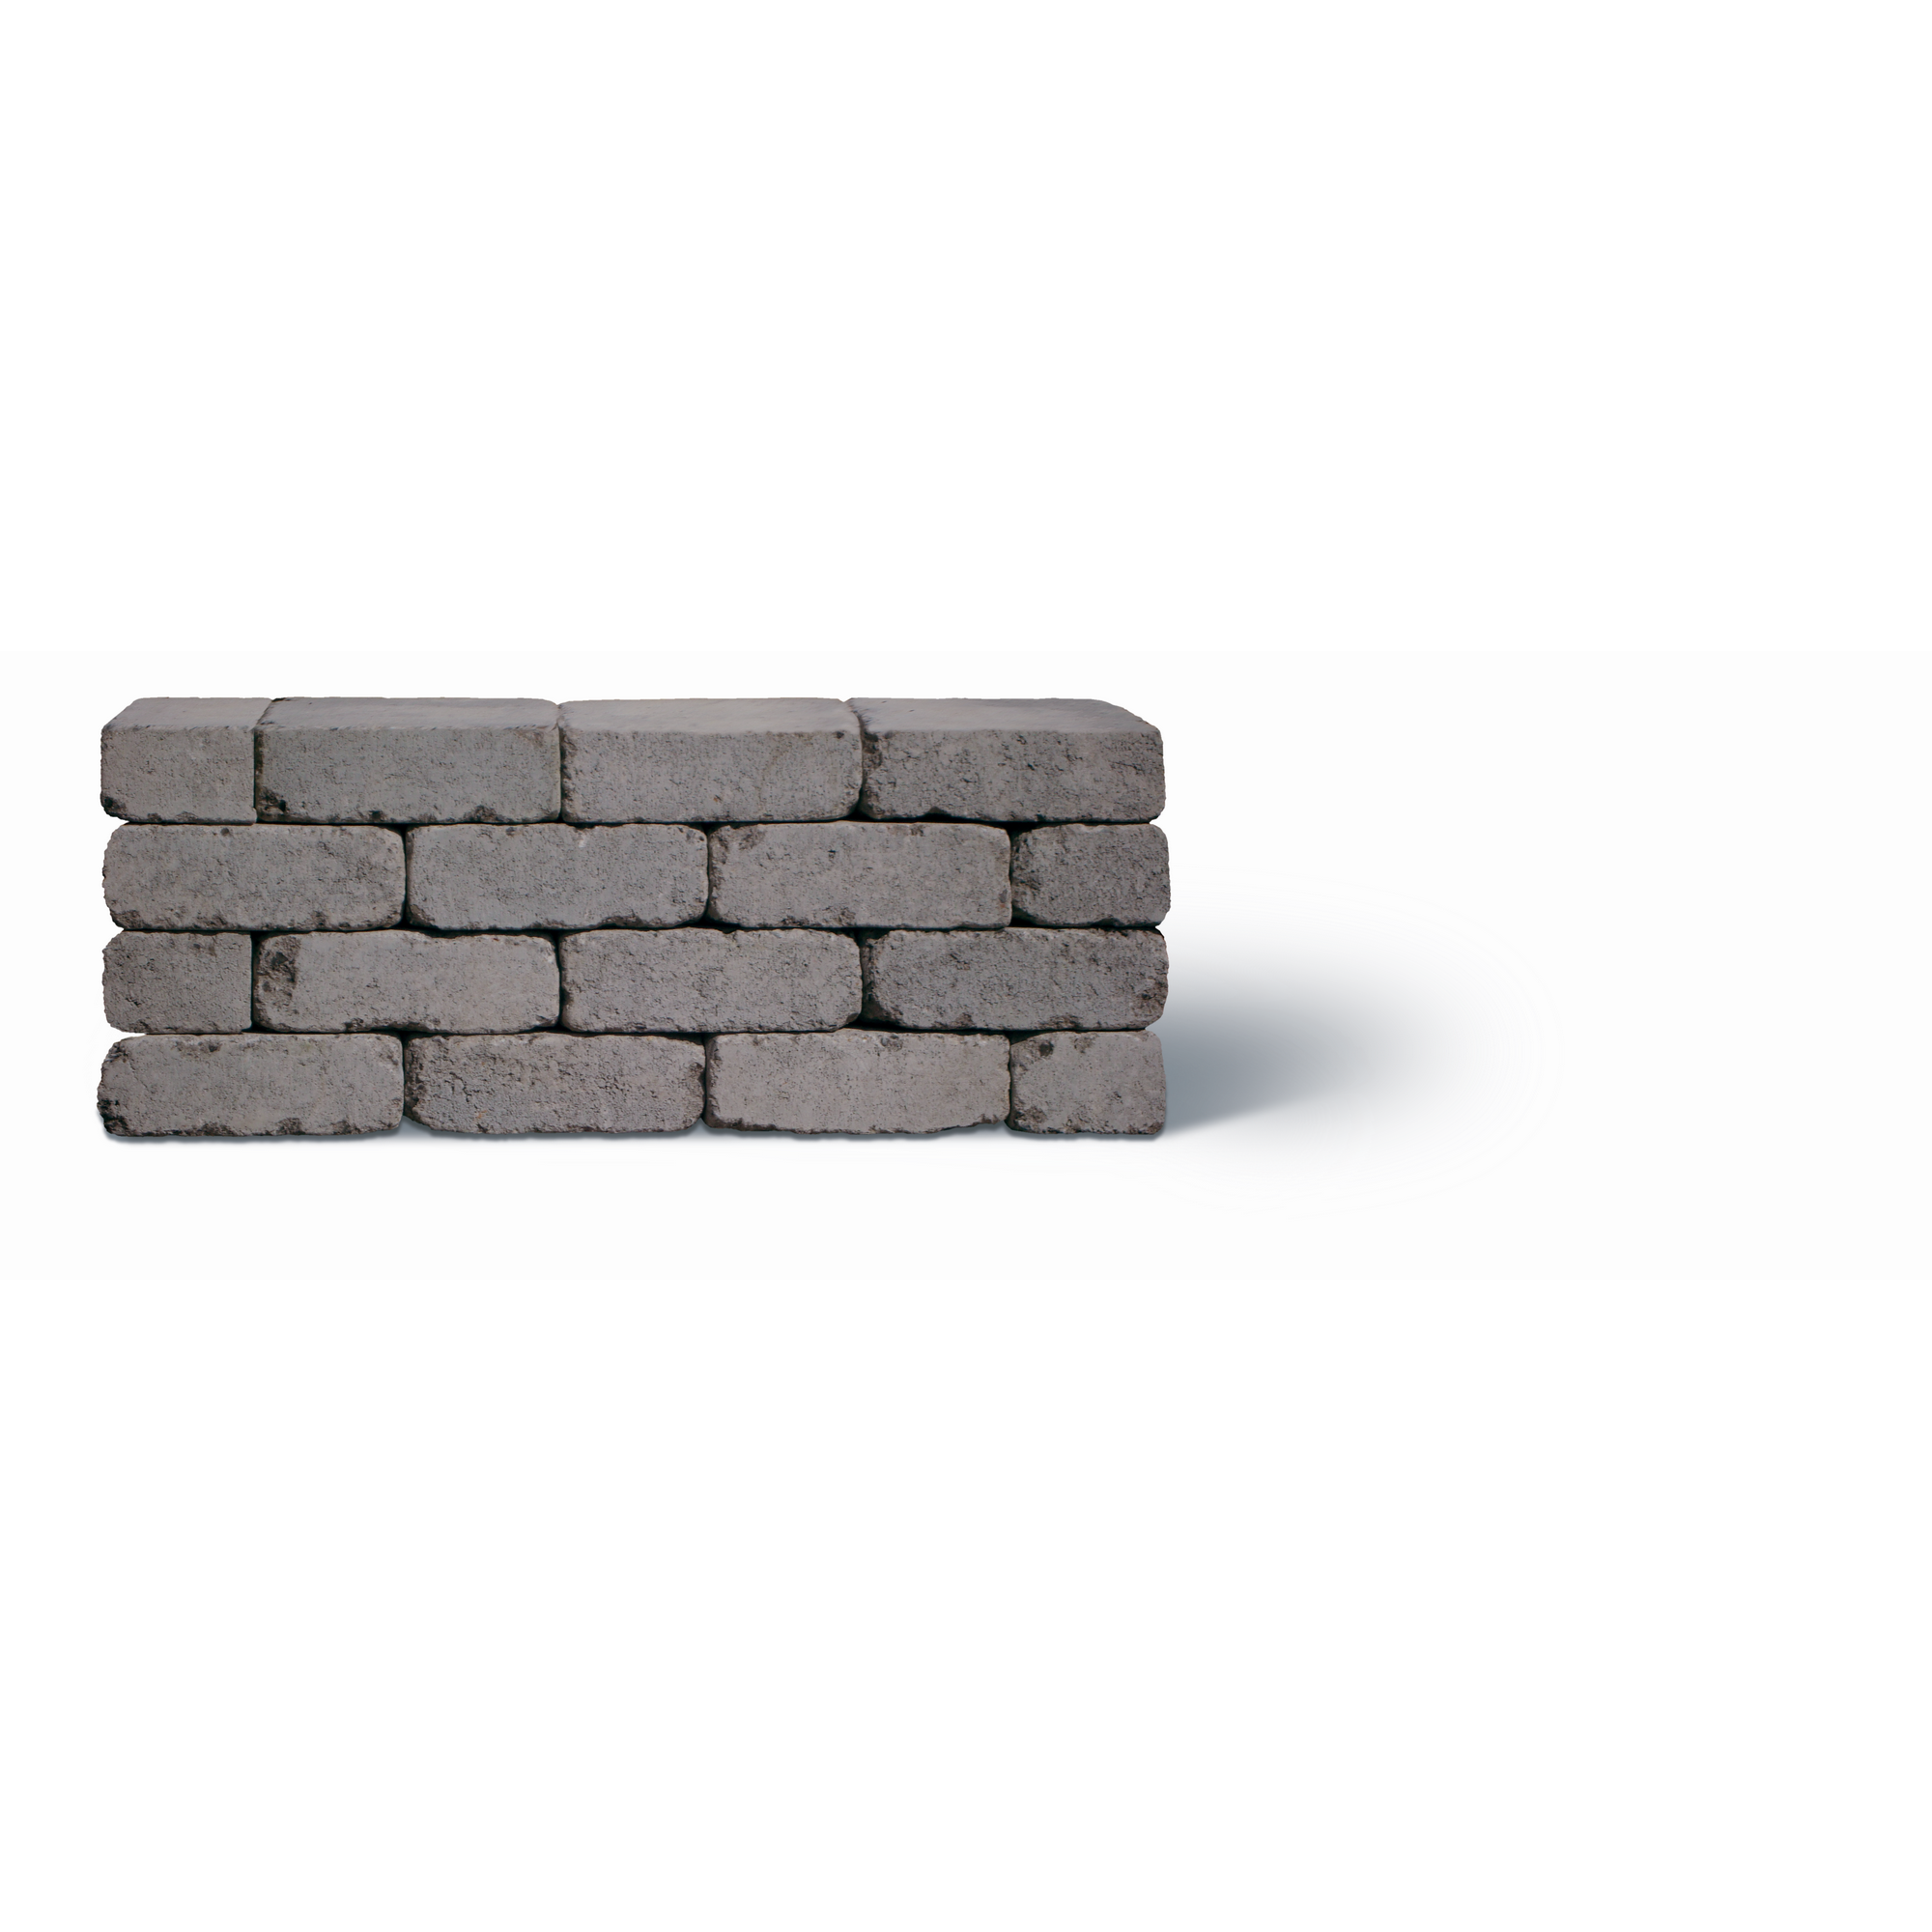 Mauerstein 'T-Wall Aged Middle' Beton basaltfarben 30 x 20 x 10 cm + product picture